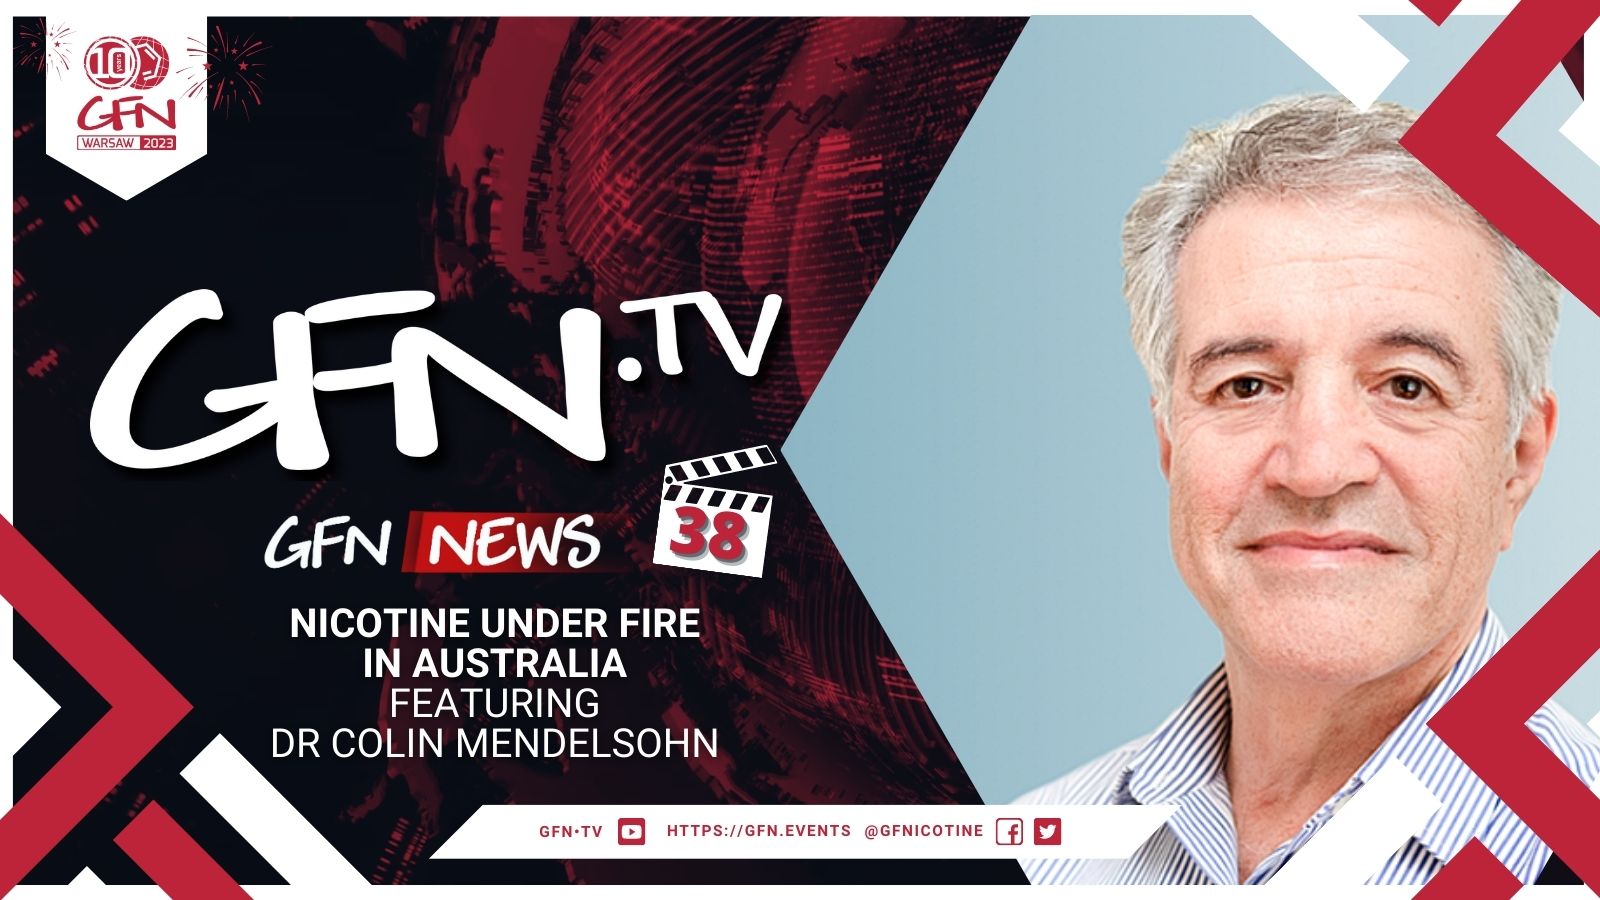 GFN News Episode #38 | NICOTINE UNDER FIRE IN AUSTRALIA | Featuring Dr Colin Mendelsohn